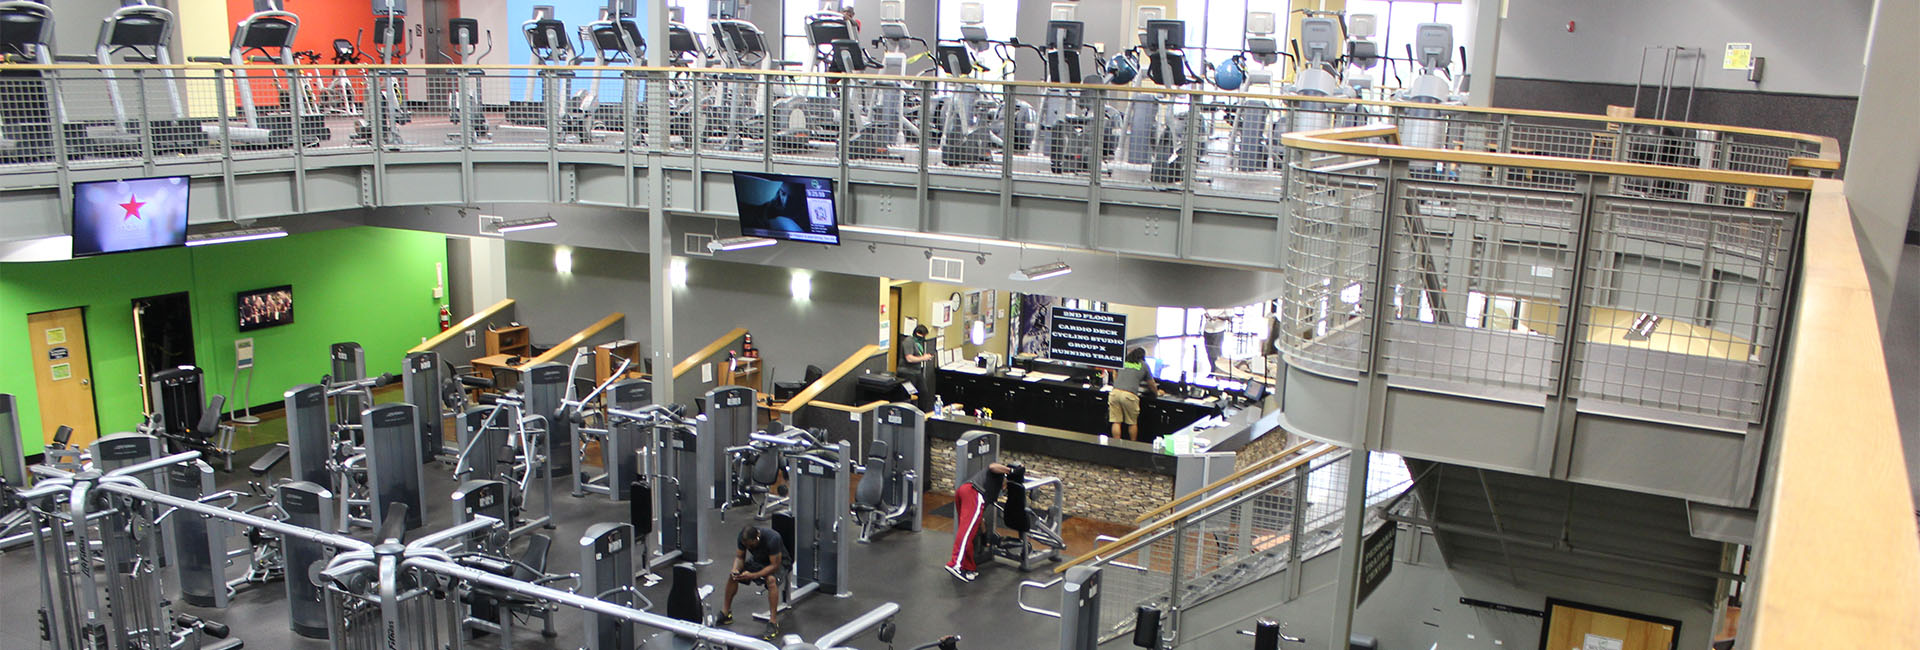 large spacious gym at MUV Fitness